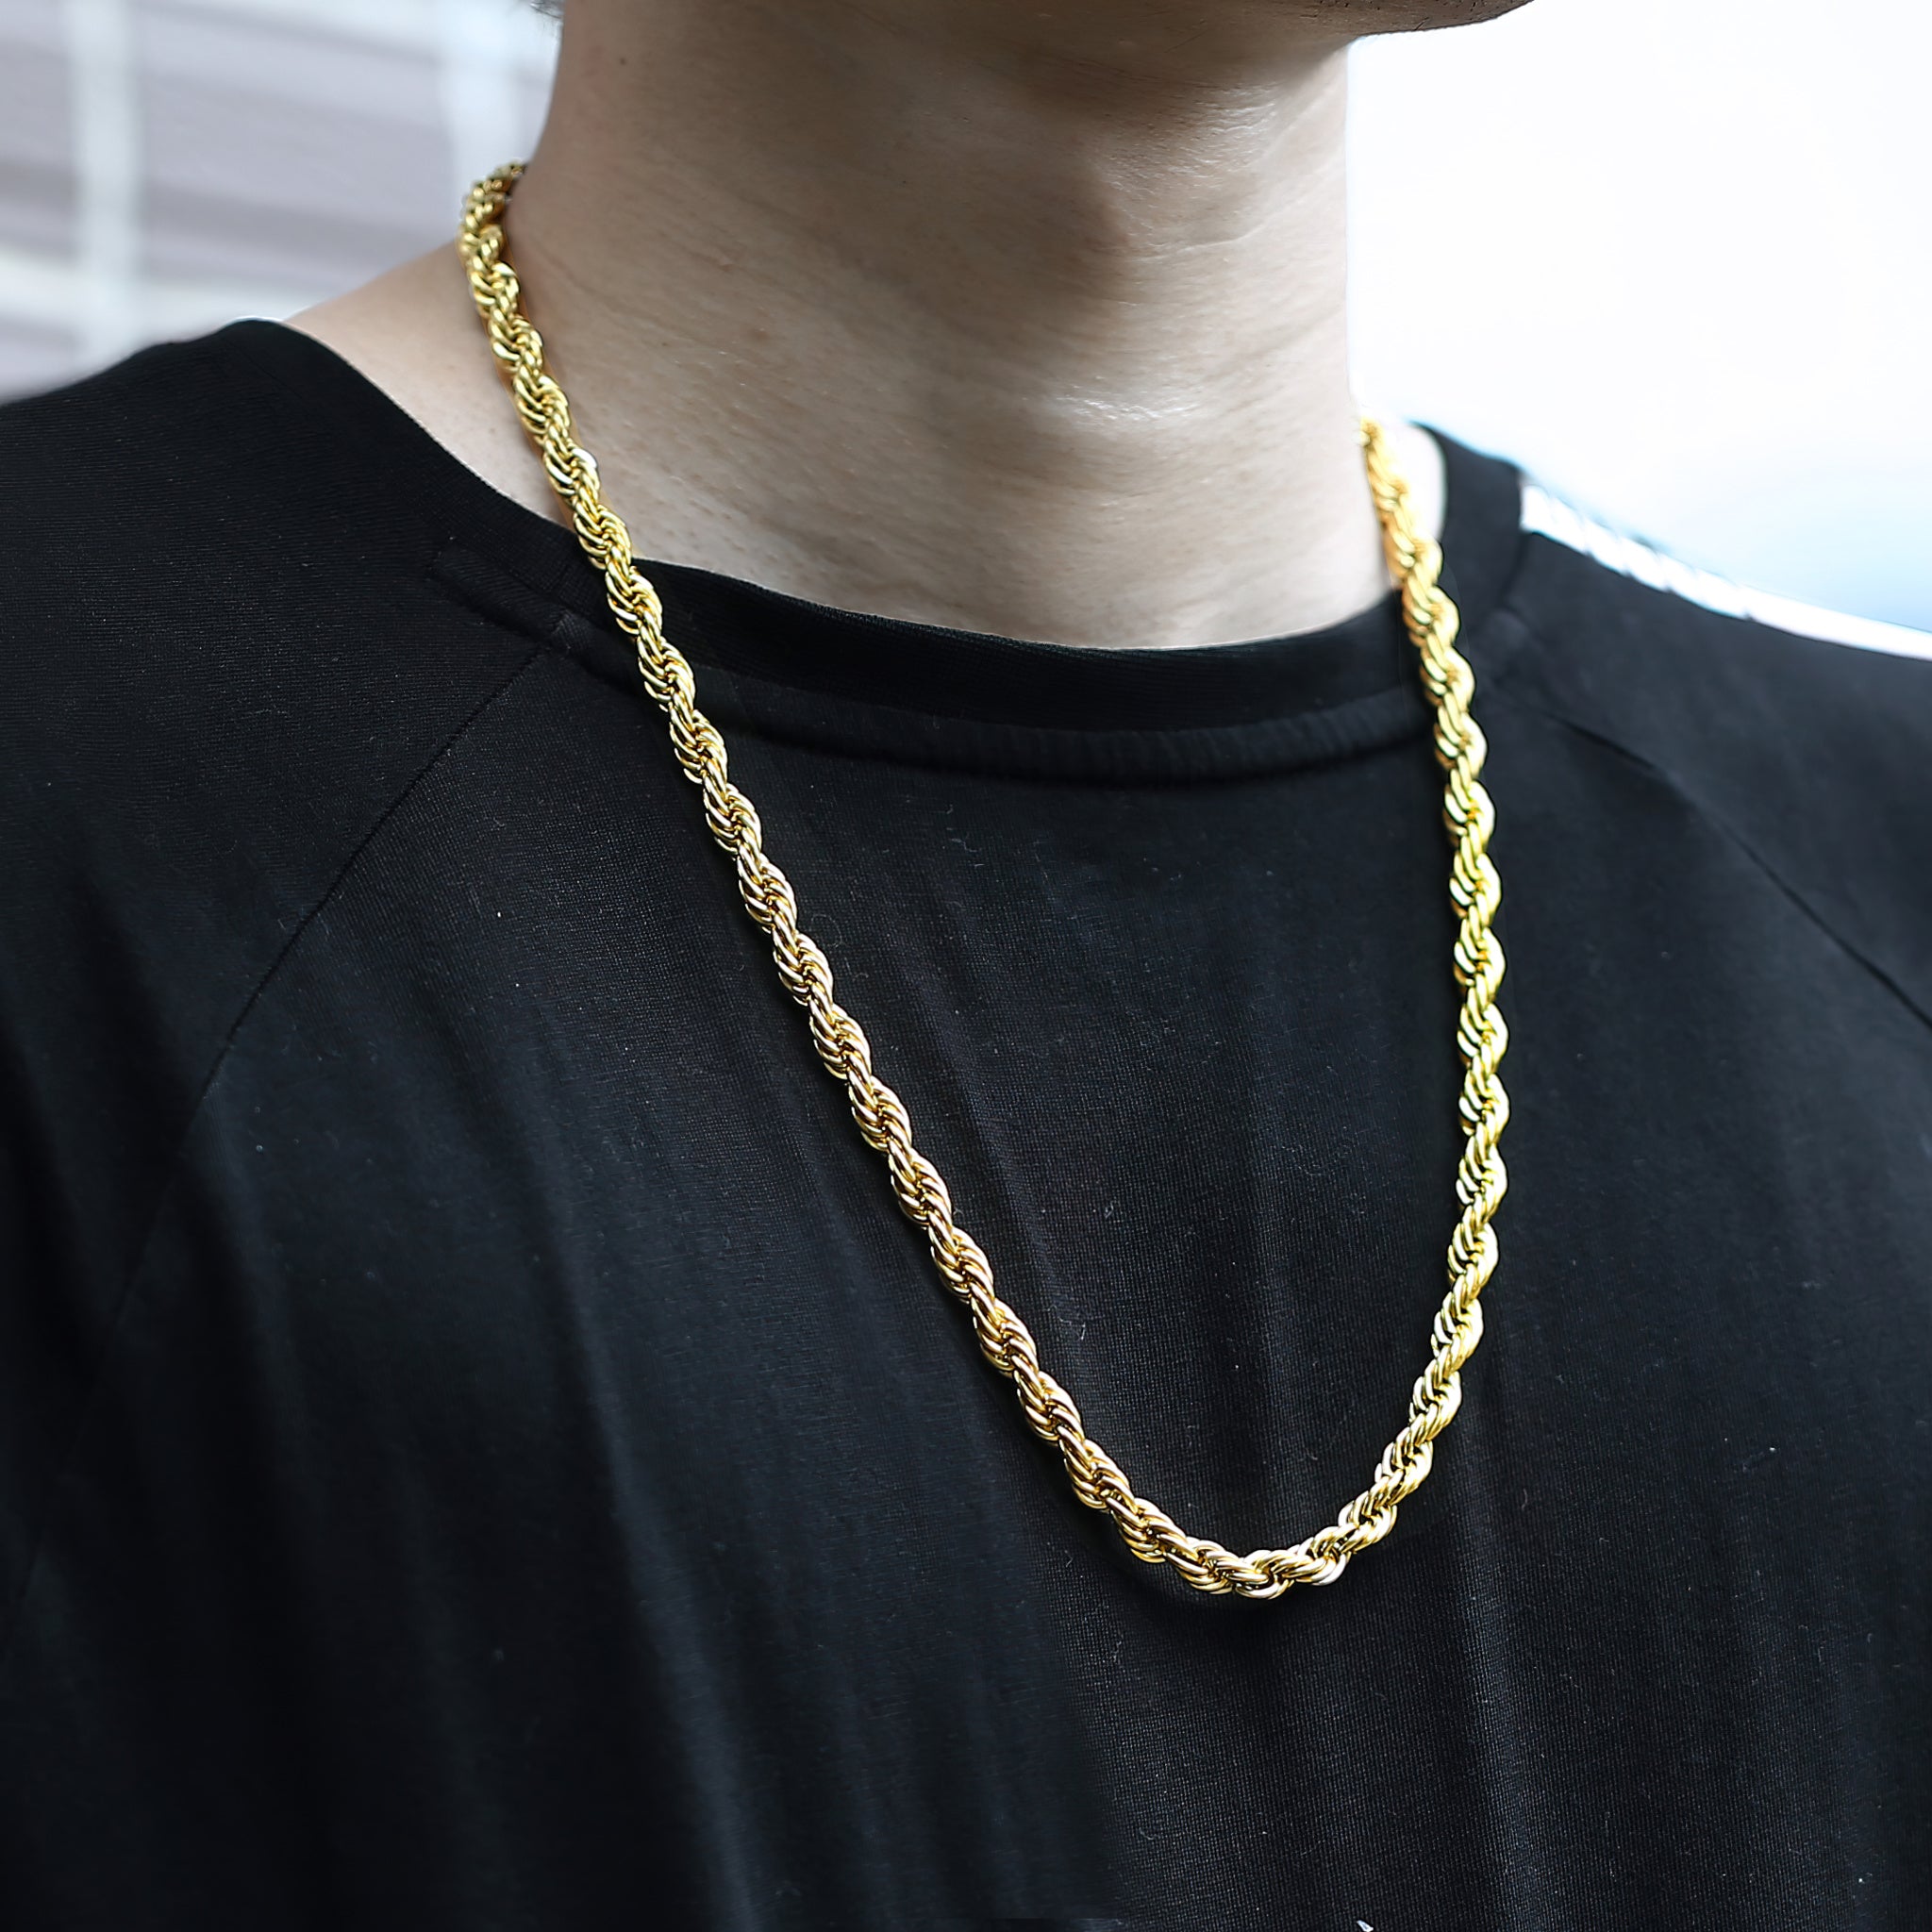 Rope Chain Necklace - Very Popular Men's Style Gold 7mm / 0.3 / 50cm/20